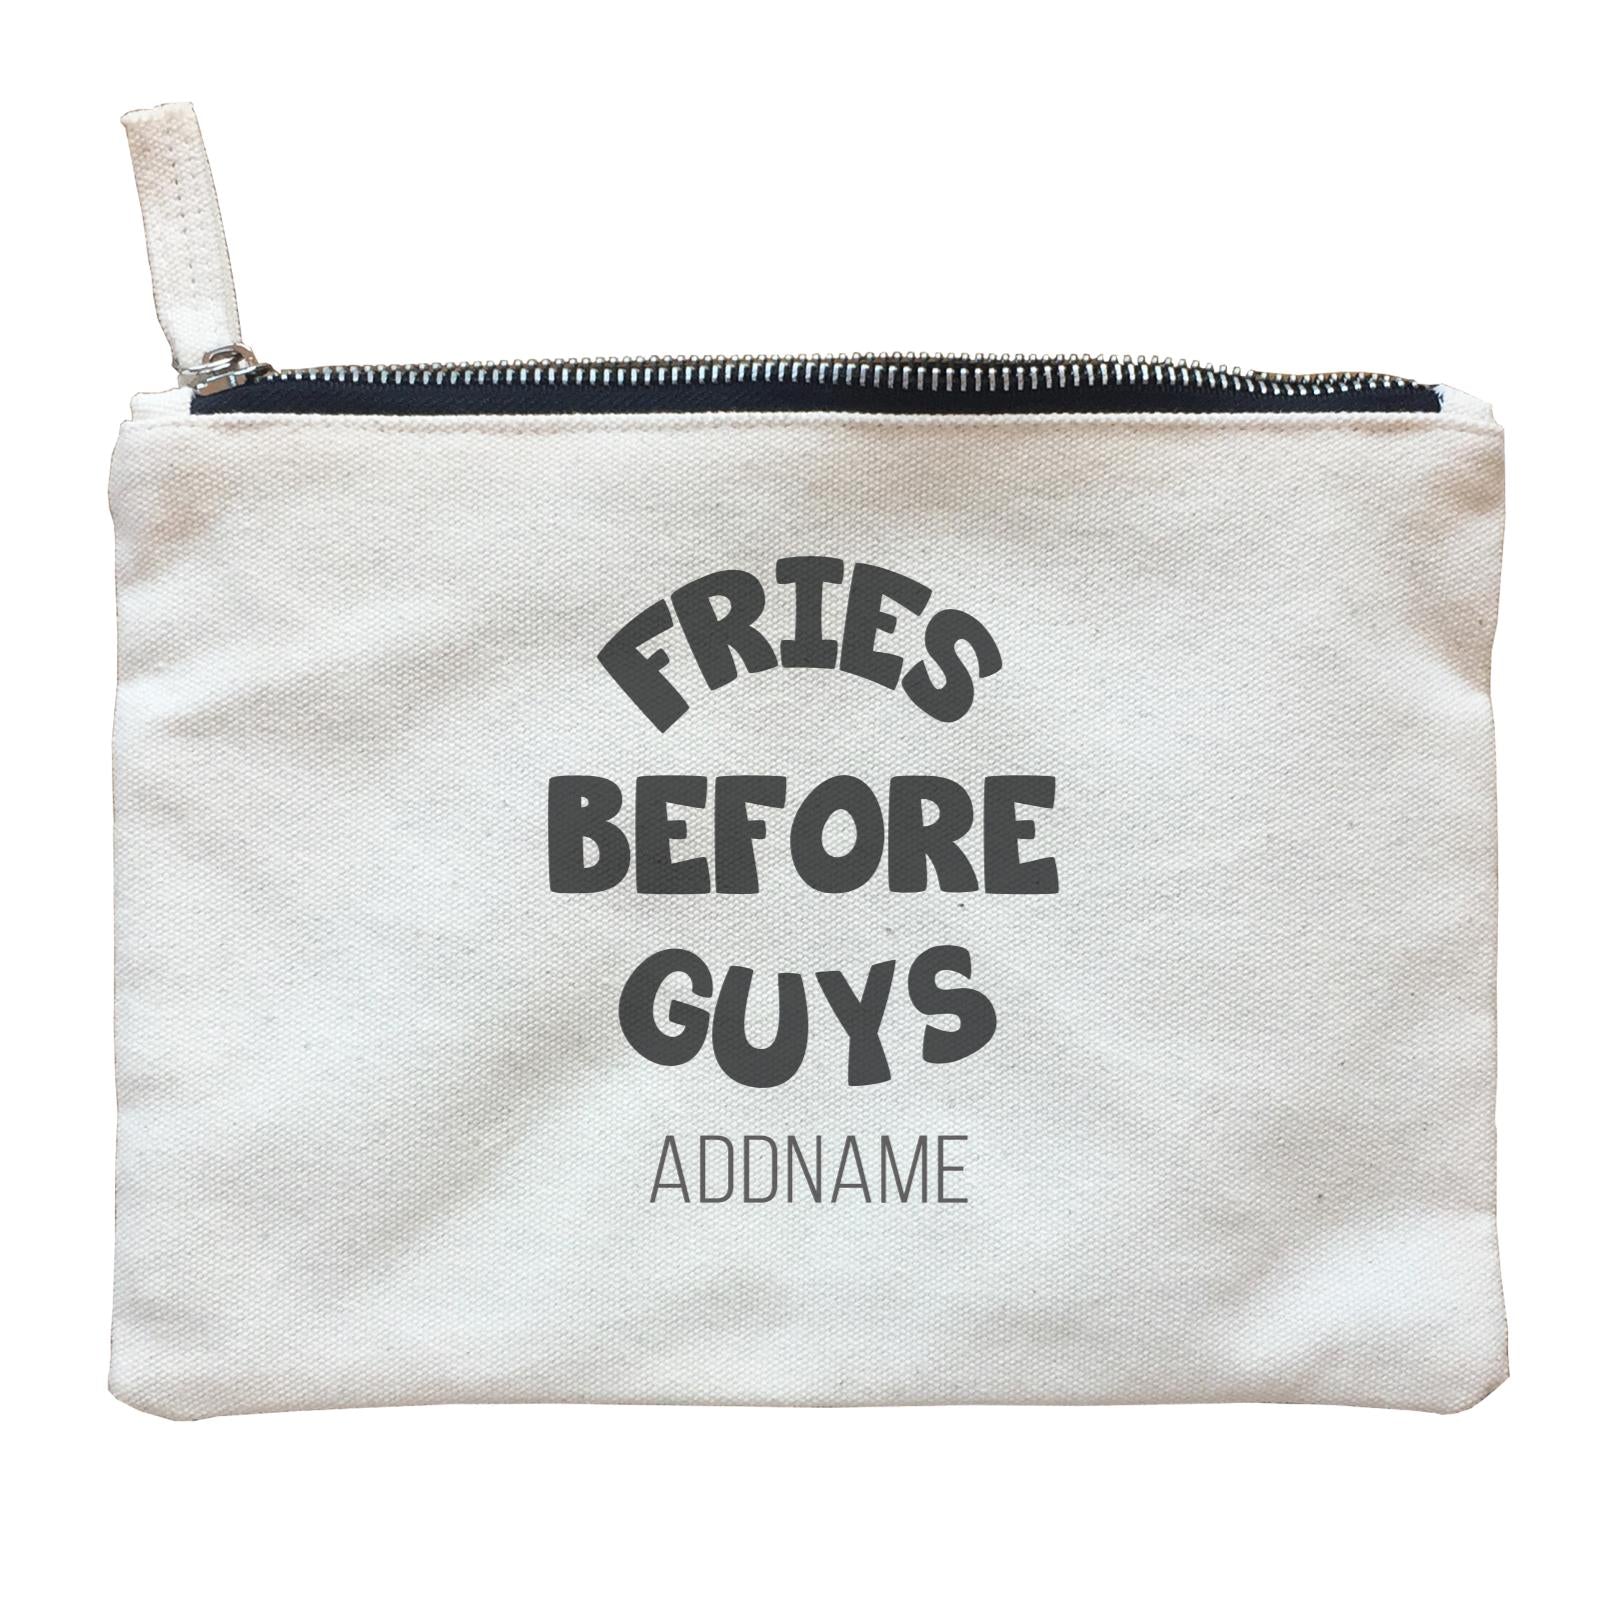 Girl Boss Quotes Fries Before Guys Addname Zipper Pouch